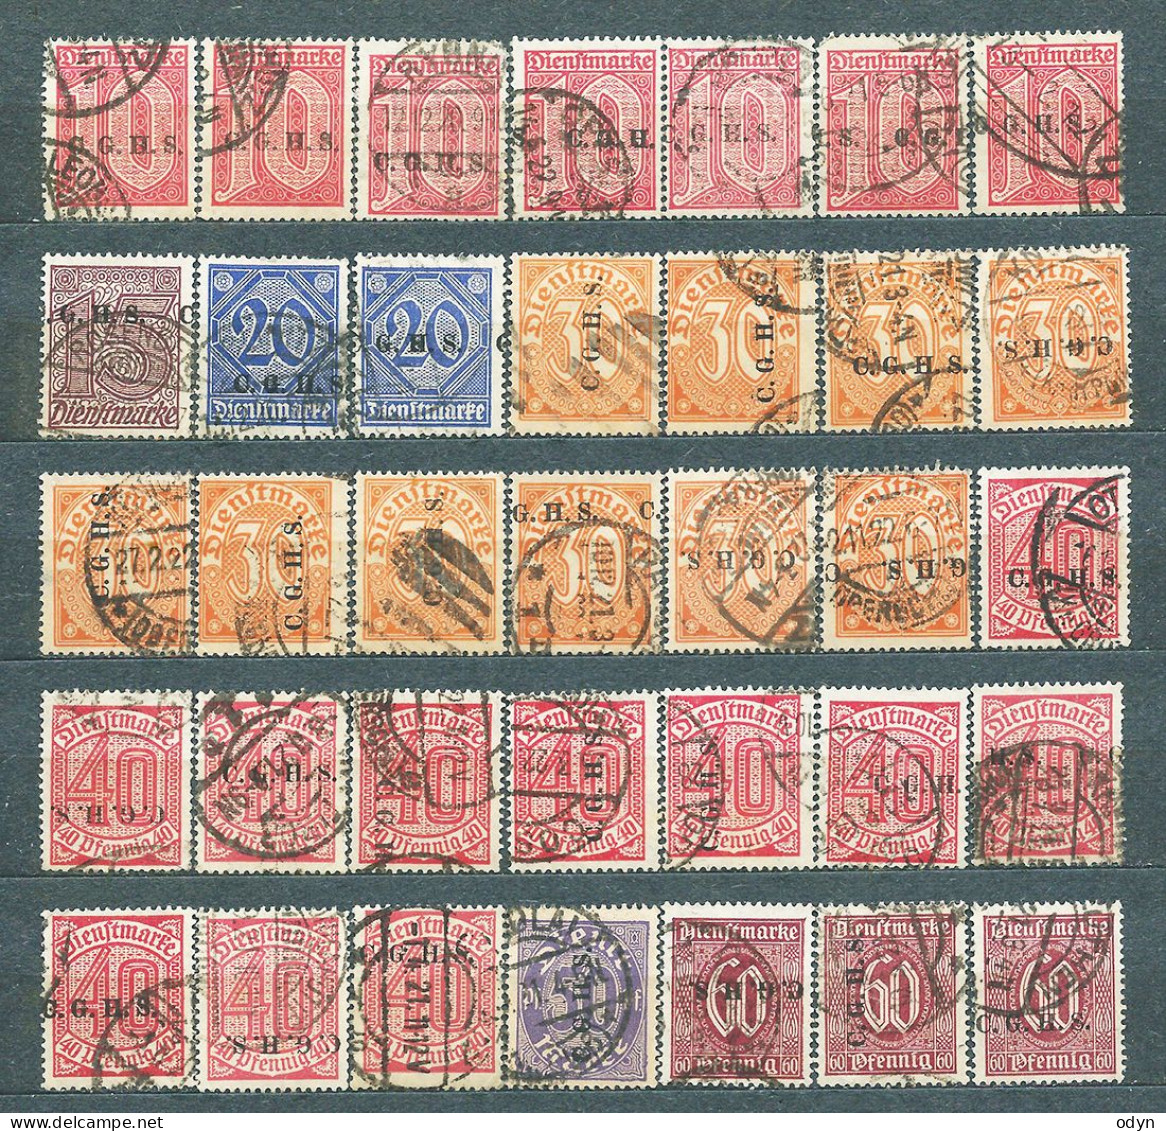 Upper Silesia, 1920, Officials, 82 Stamps From Set MiNr 8-20 (incl. 4 Stamps #18 Wz. 1) - Overprint C.G.H.S. - Used - Silesia